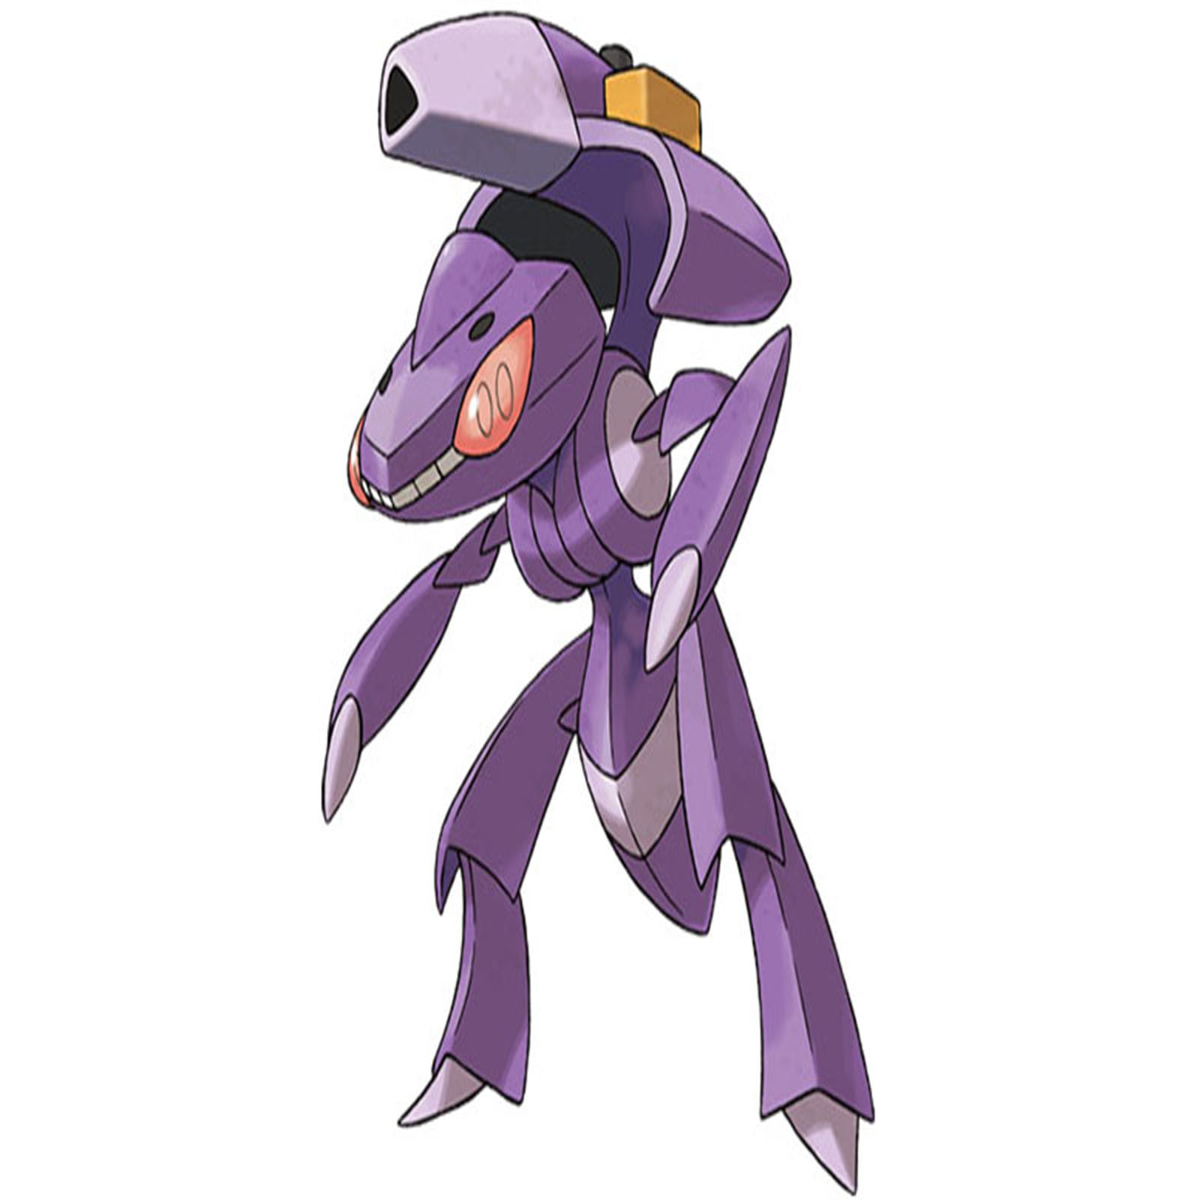 What is the best moveset for Genesect with Shock Drive in Pokemon GO?